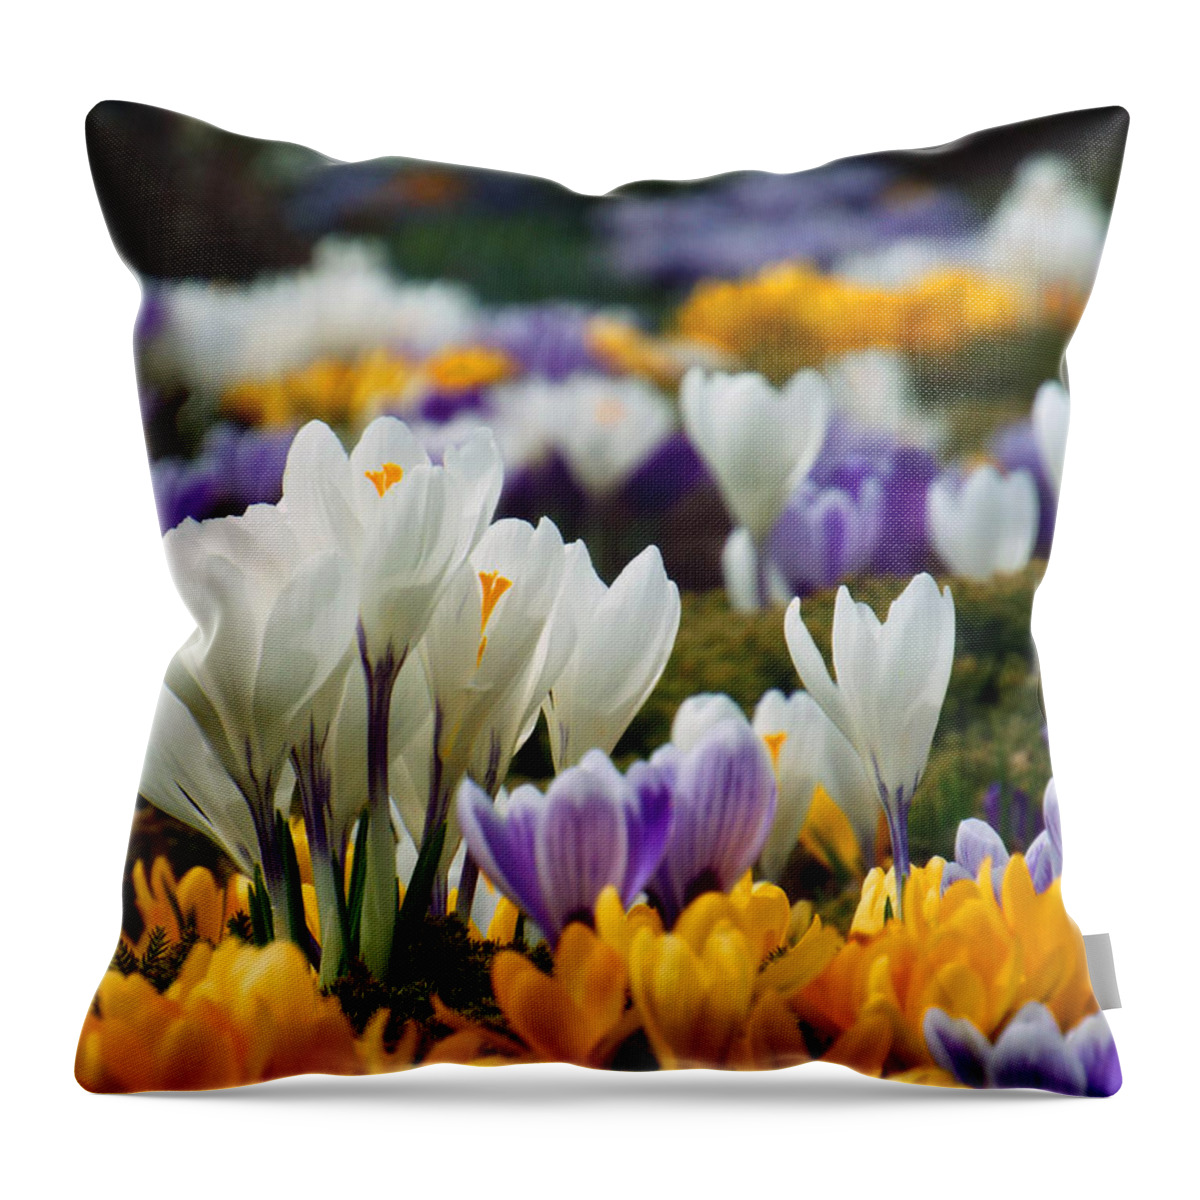 Brewster Throw Pillow featuring the photograph Spring Crocus by Dianne Cowen Cape Cod Photography